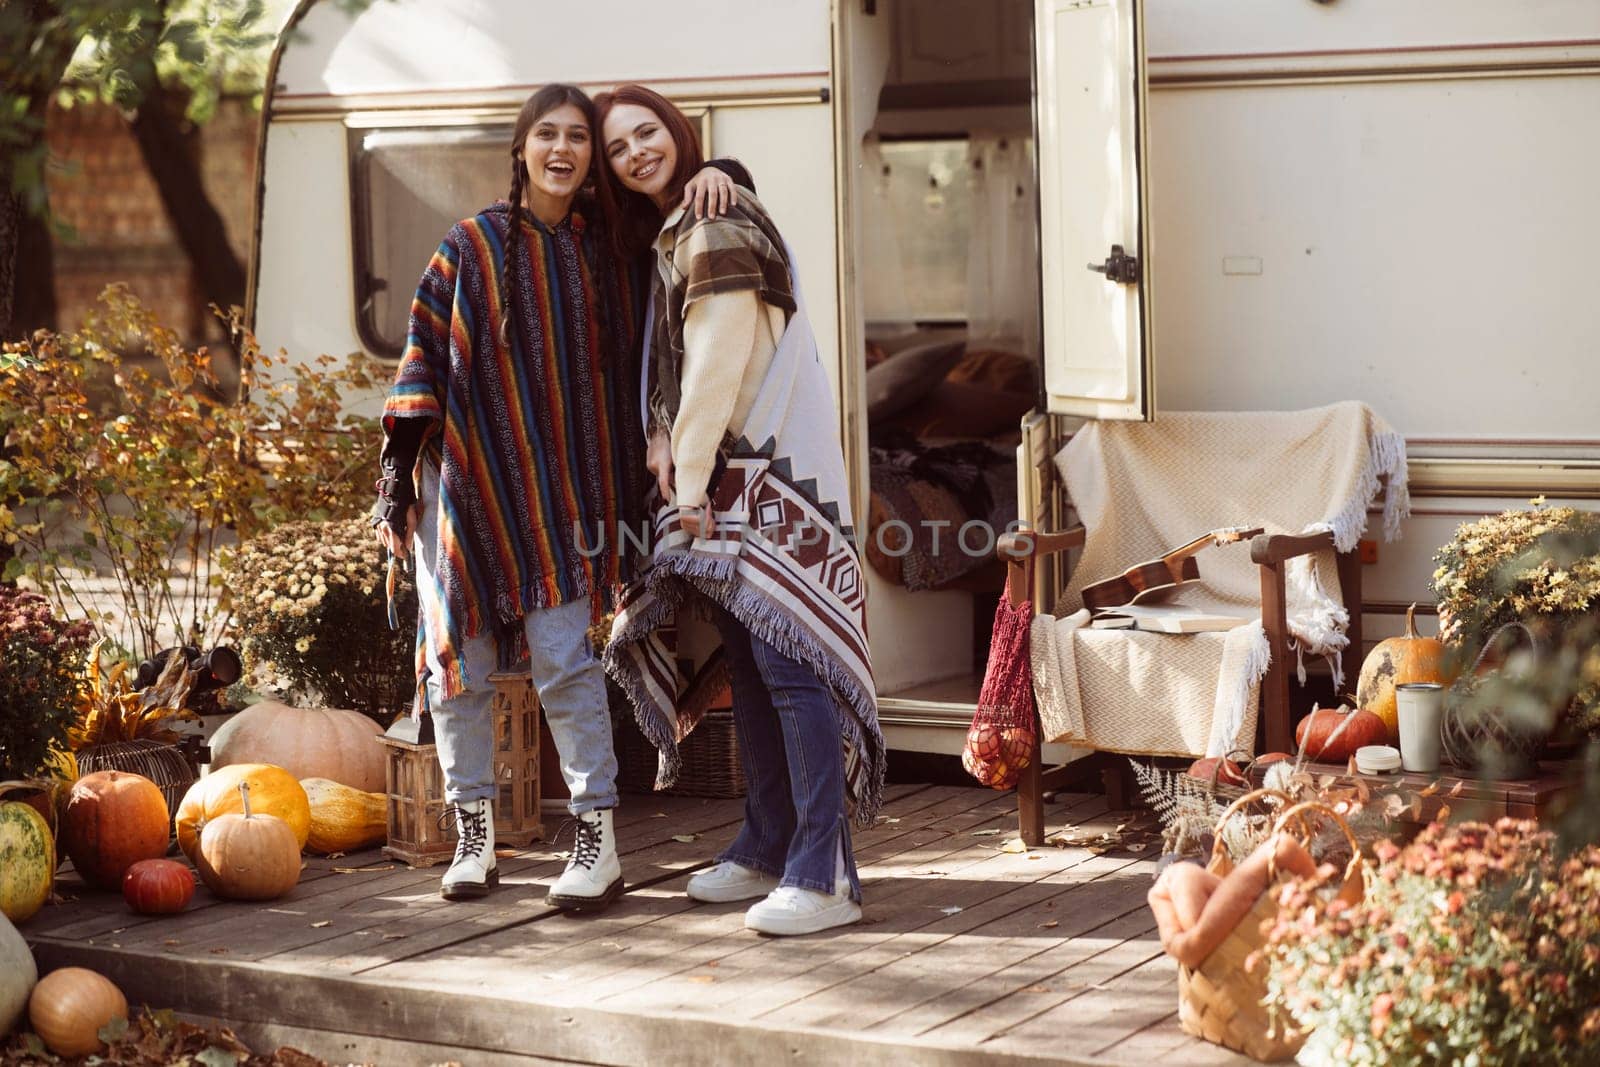 A pair of fashionable young women rock bohemian looks in front of a trailer. High quality photo